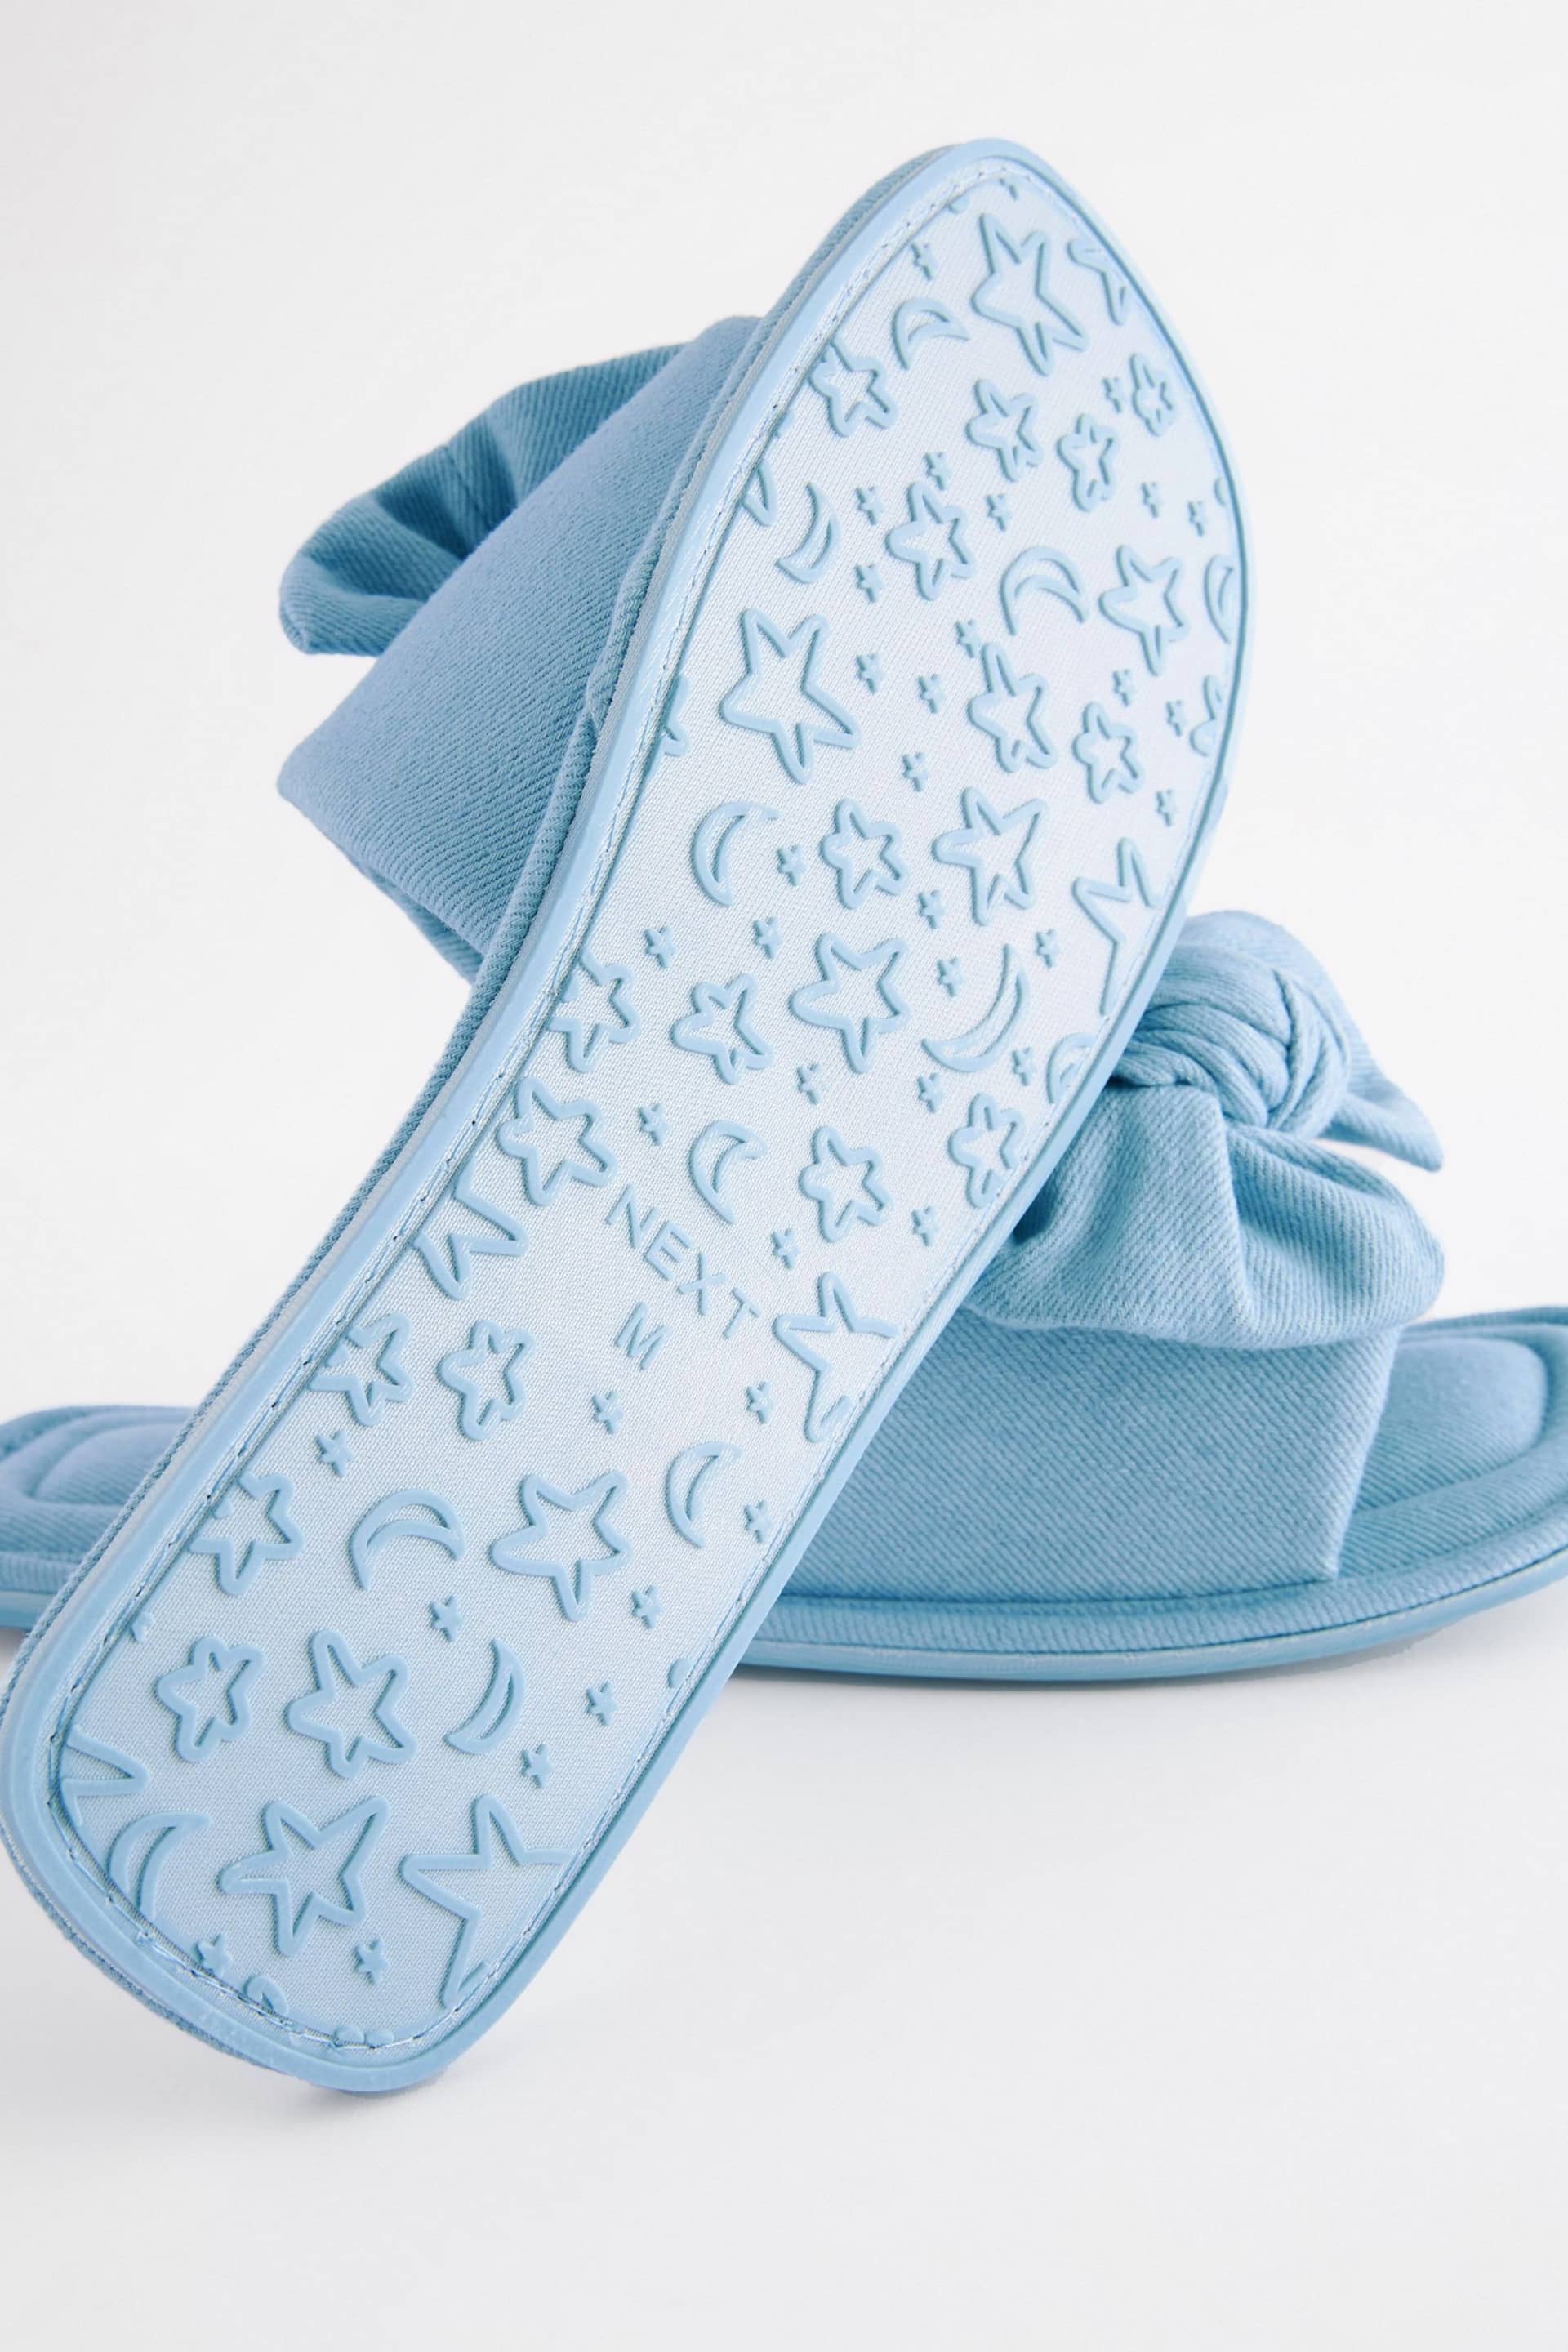 Blue Bow Mule Slippers - Image 5 of 7